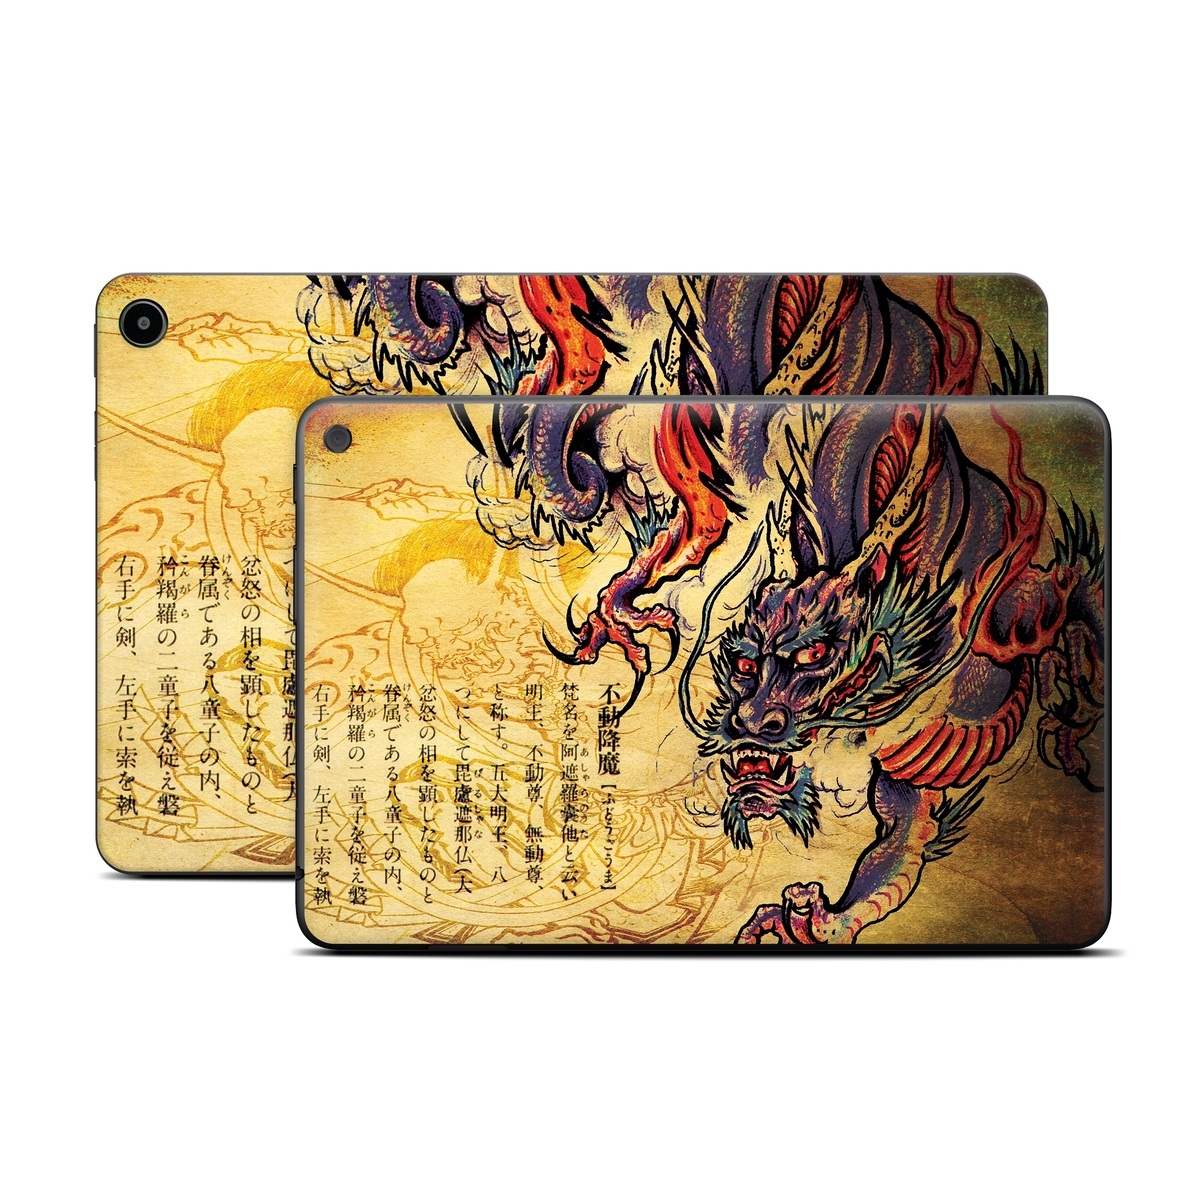 Amazon Fire Tablet Series Skin Skin design of Illustration, Fictional character, Art, Demon, Drawing, Visual arts, Dragon, Supernatural creature, Mythical creature, Mythology, with black, green, red, gray, pink, orange colors